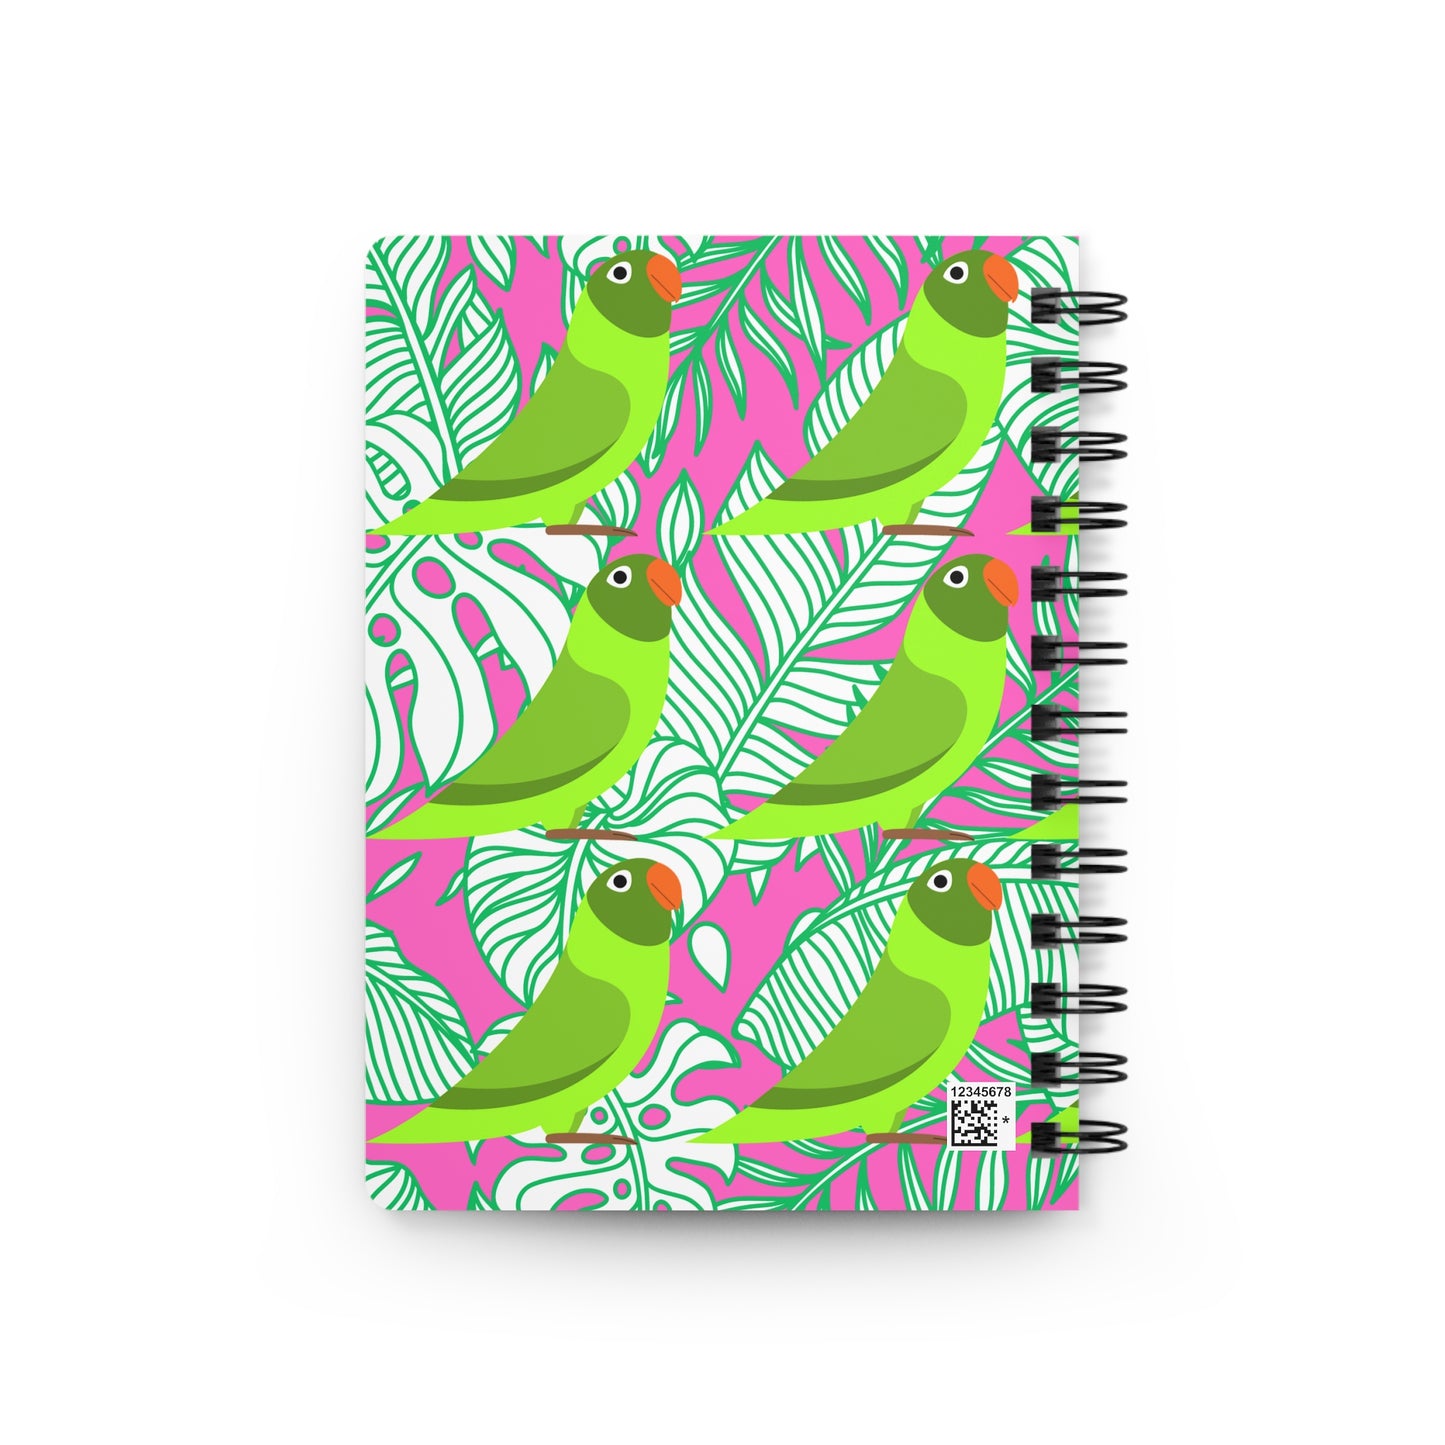 Parrots of Palm Beach Tropical Hot Pink Writing Sketch Inspiration Travel Spiral Bound Journal